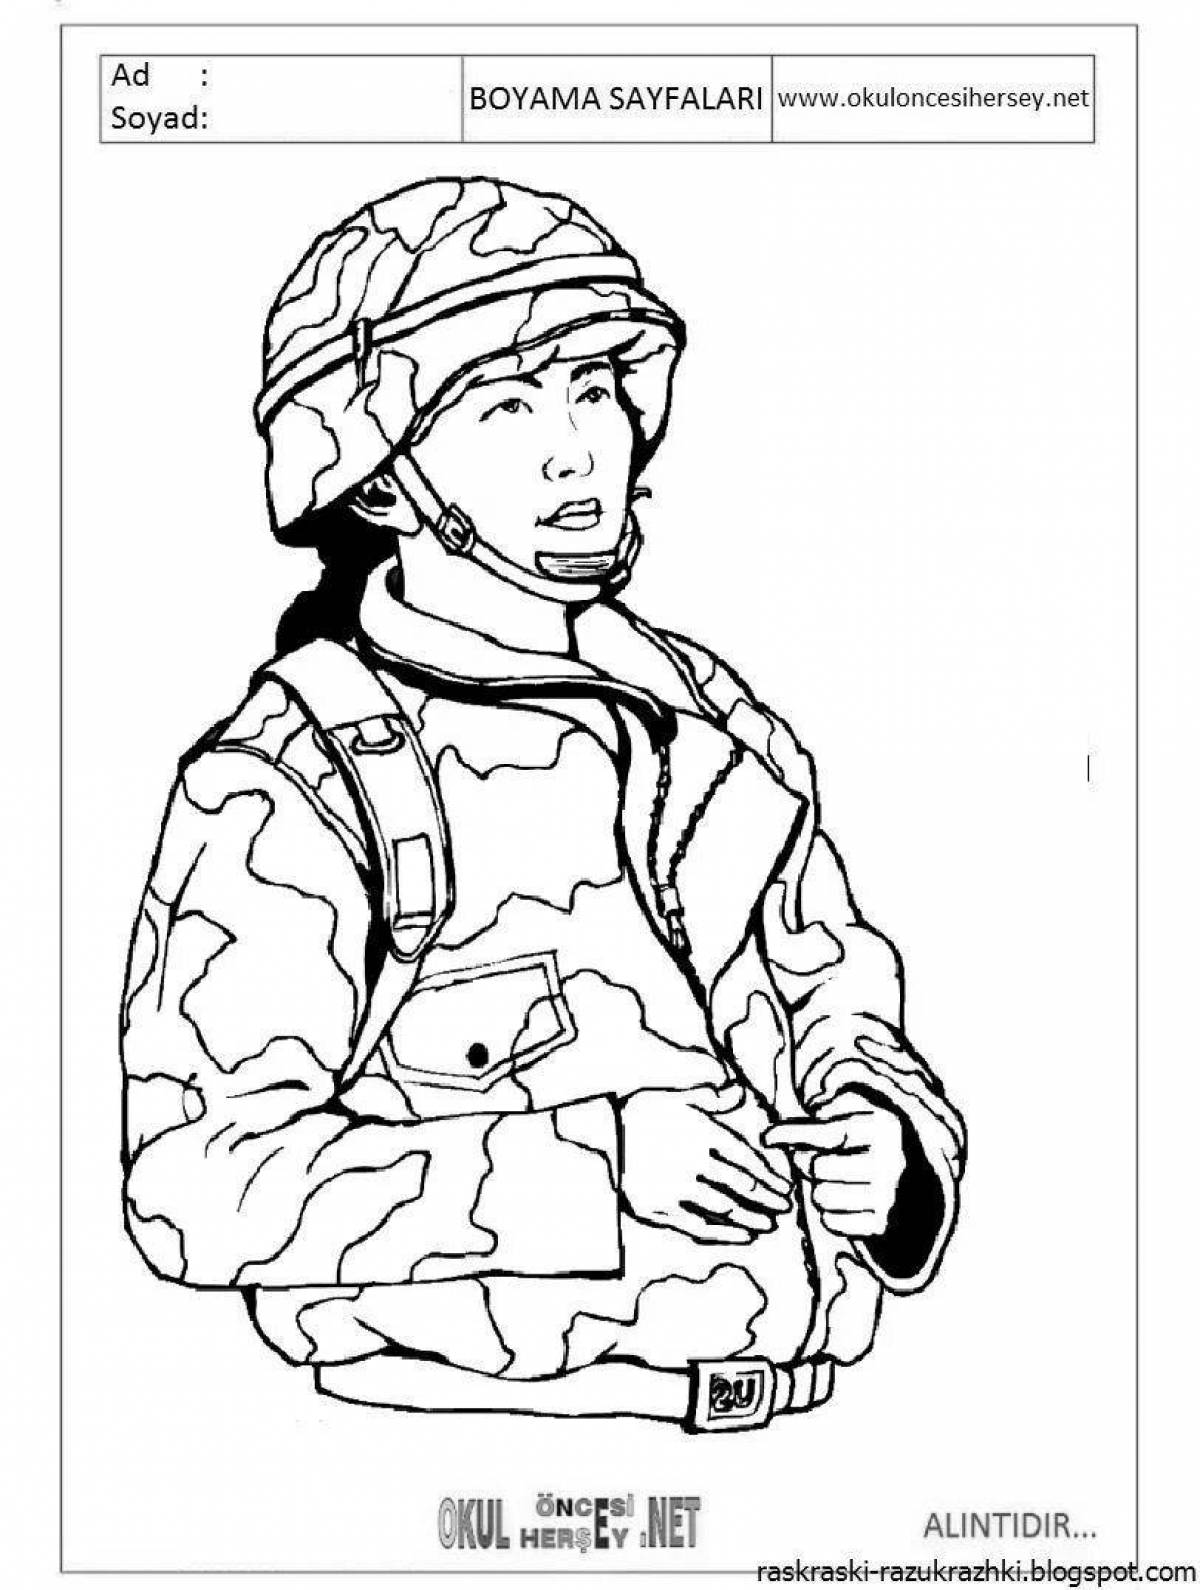 Adorable soldier drawing for kids